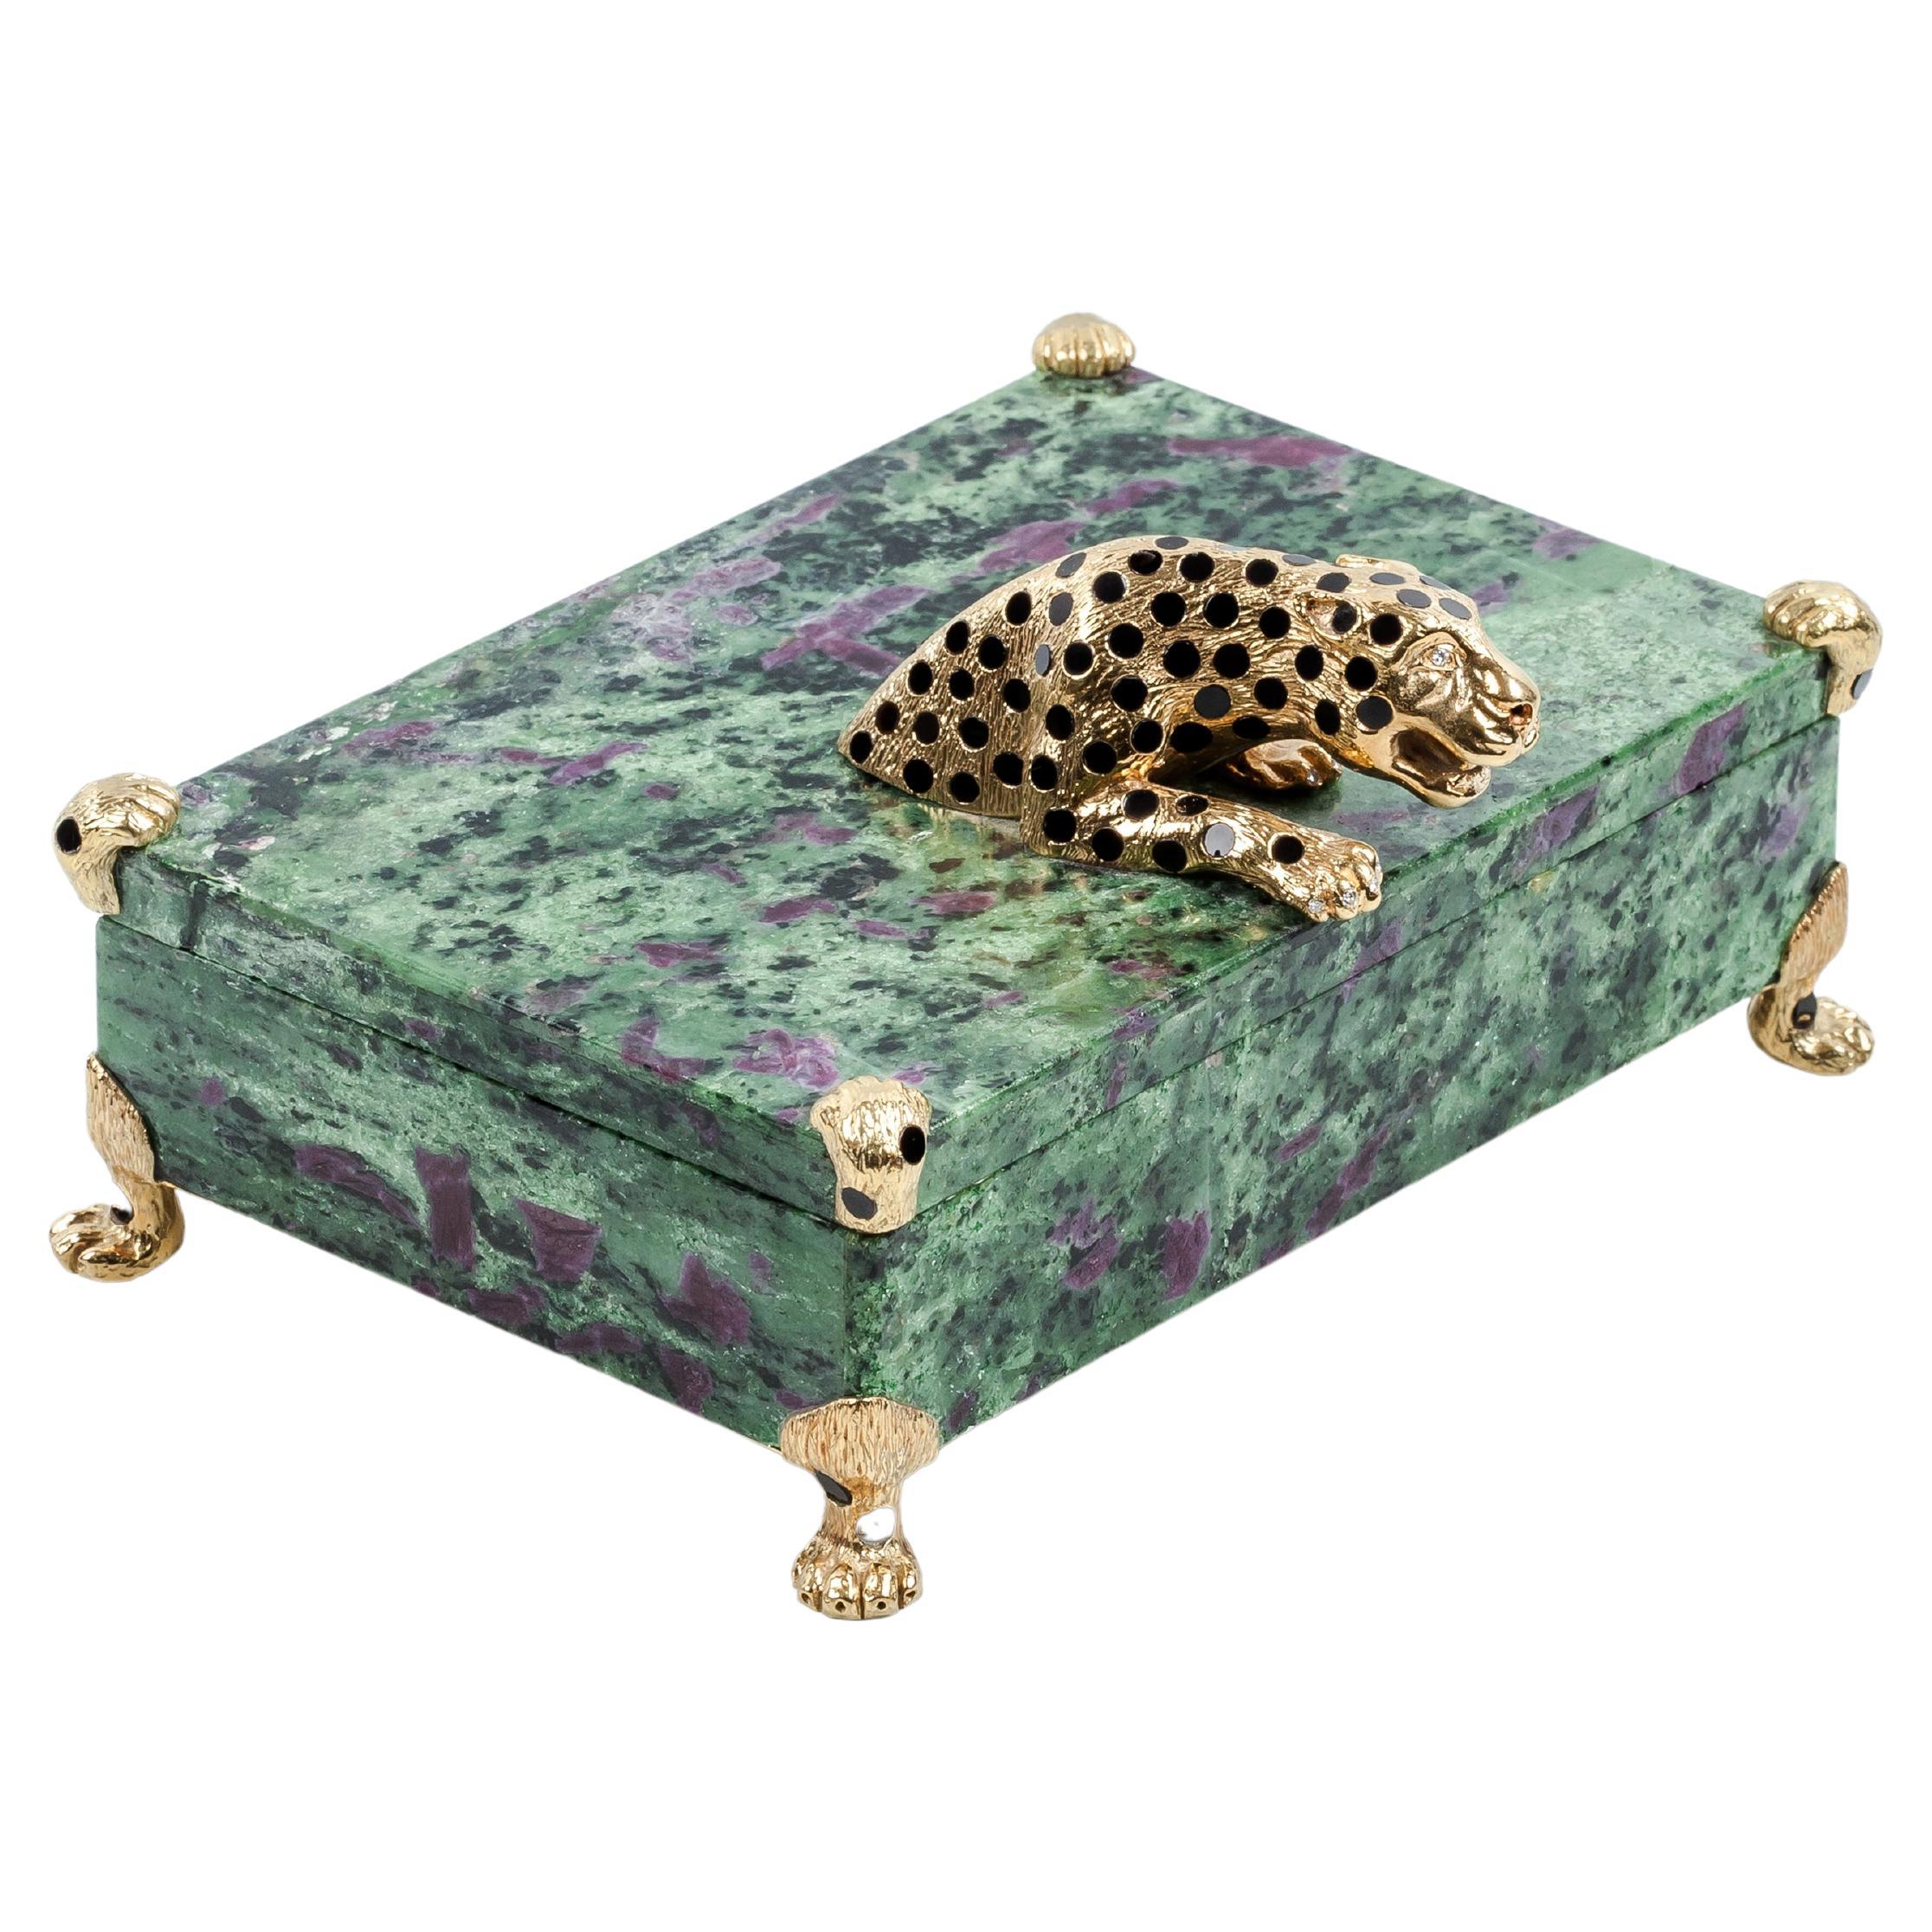 Gregory Gold & Onyx Panther in anyolite rubi jewelry box